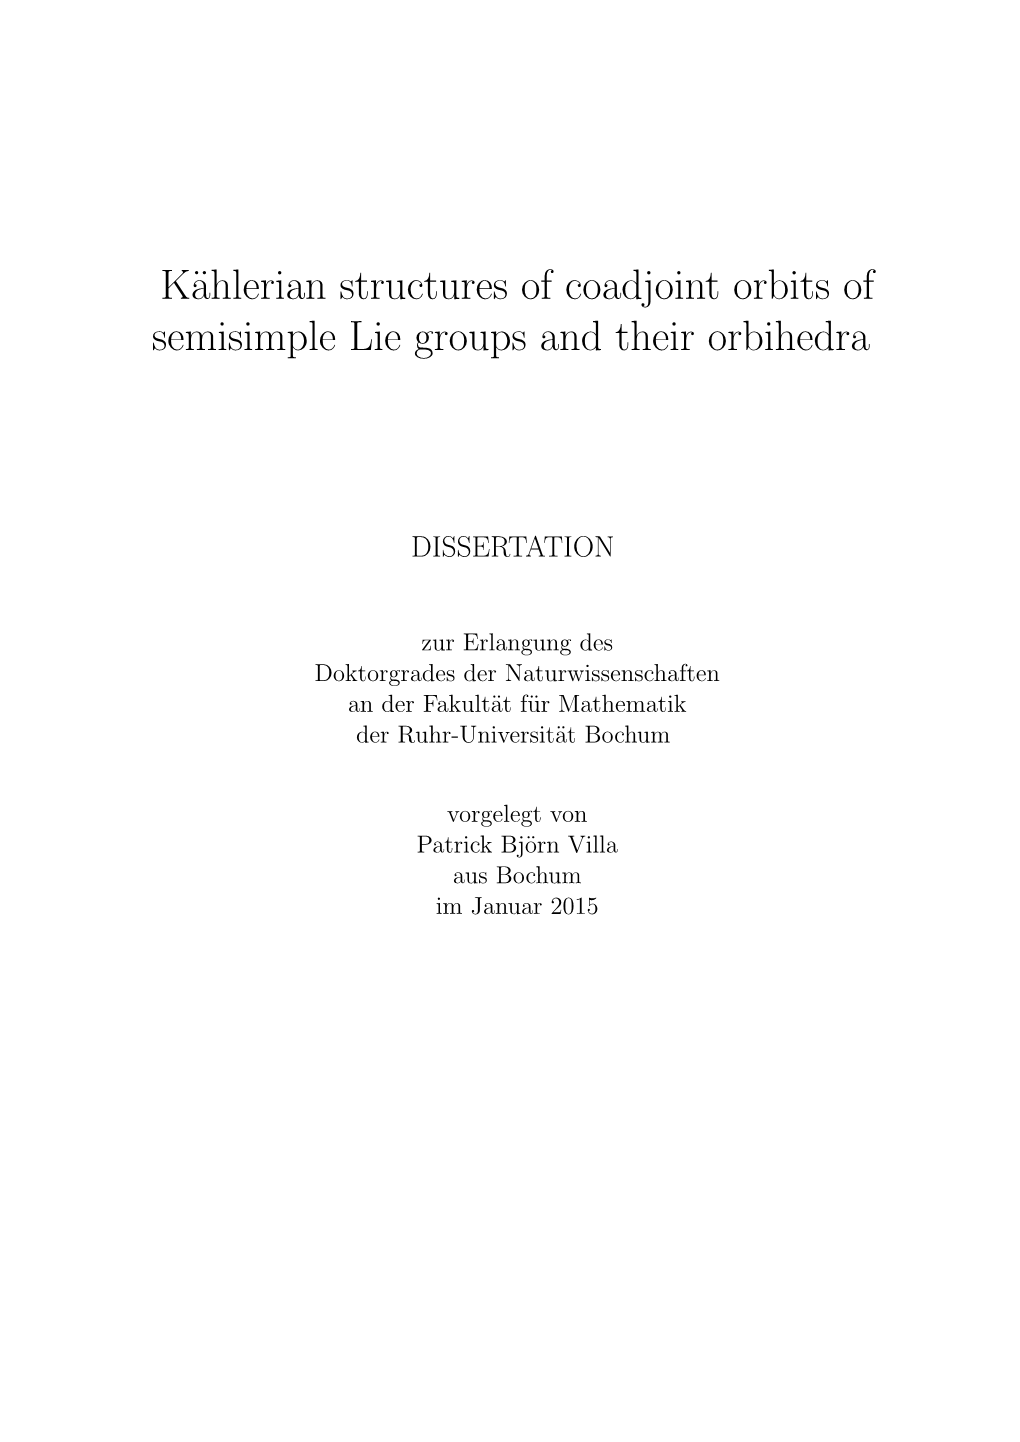 Kählerian Structures of Coadjoint Orbits of Semisimple Lie Groups and Their